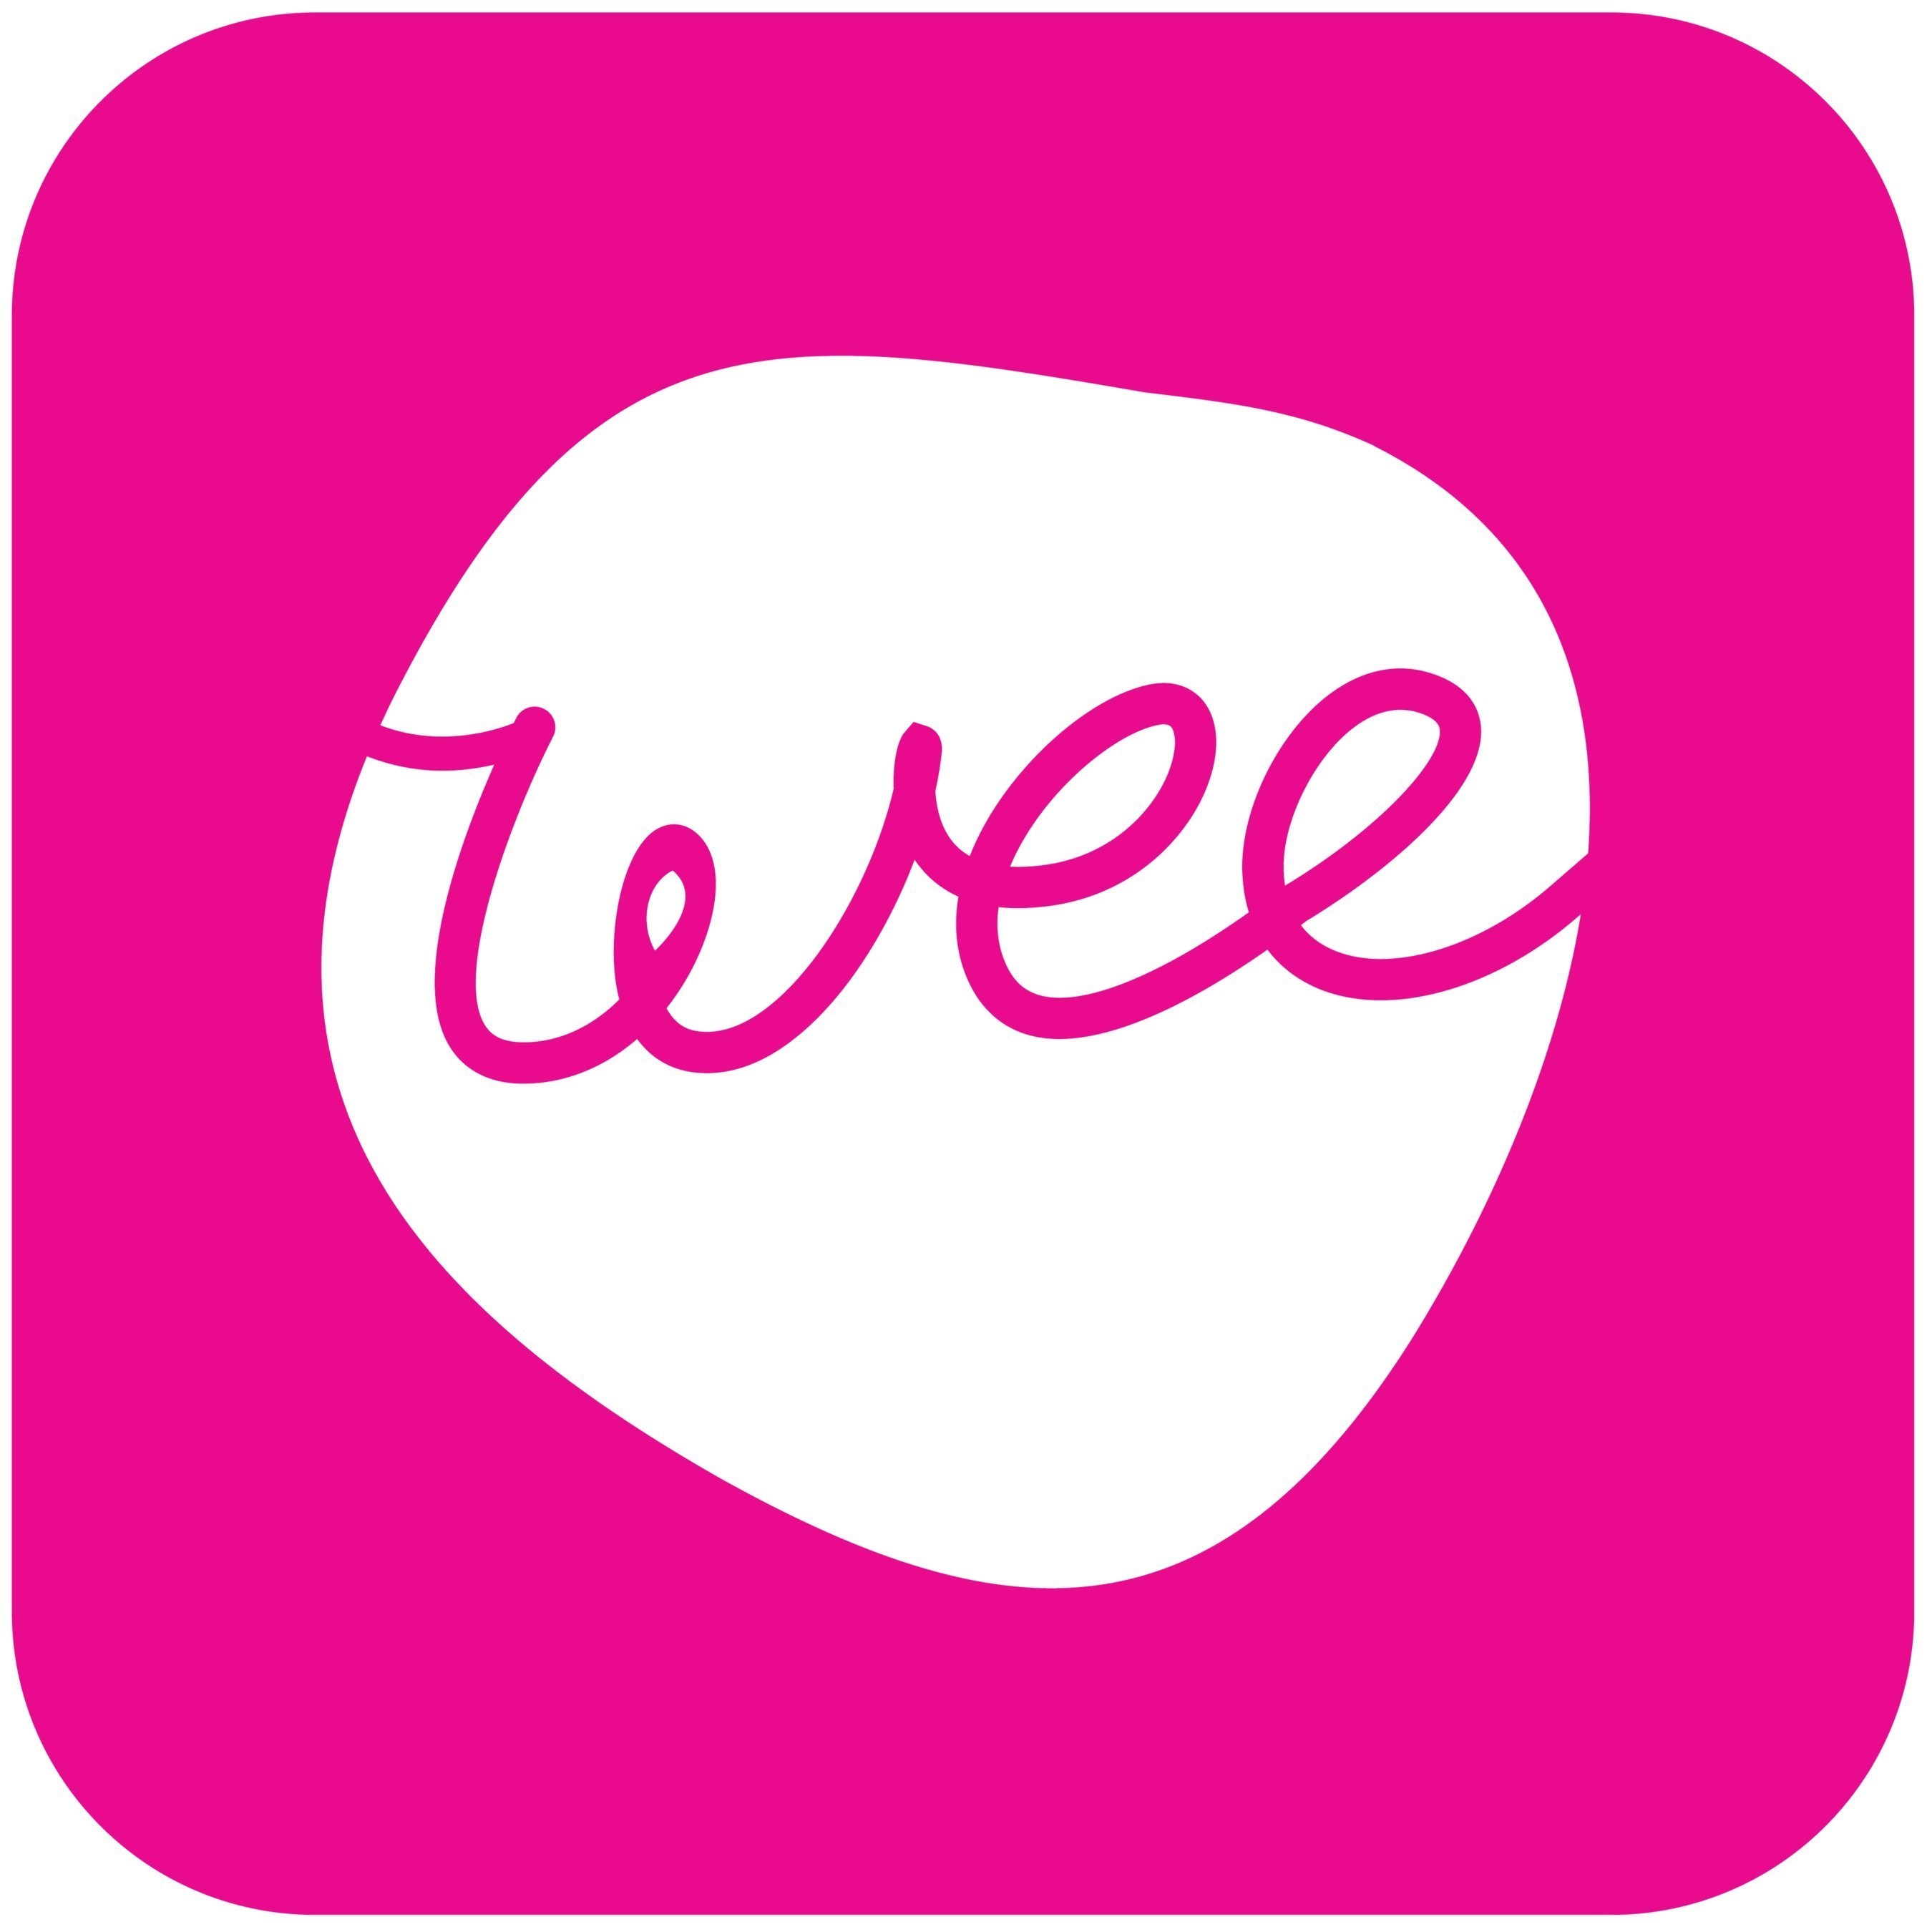 weeSPIN is the app that combines music streaming services with social media so you can build playlists that sound like you.